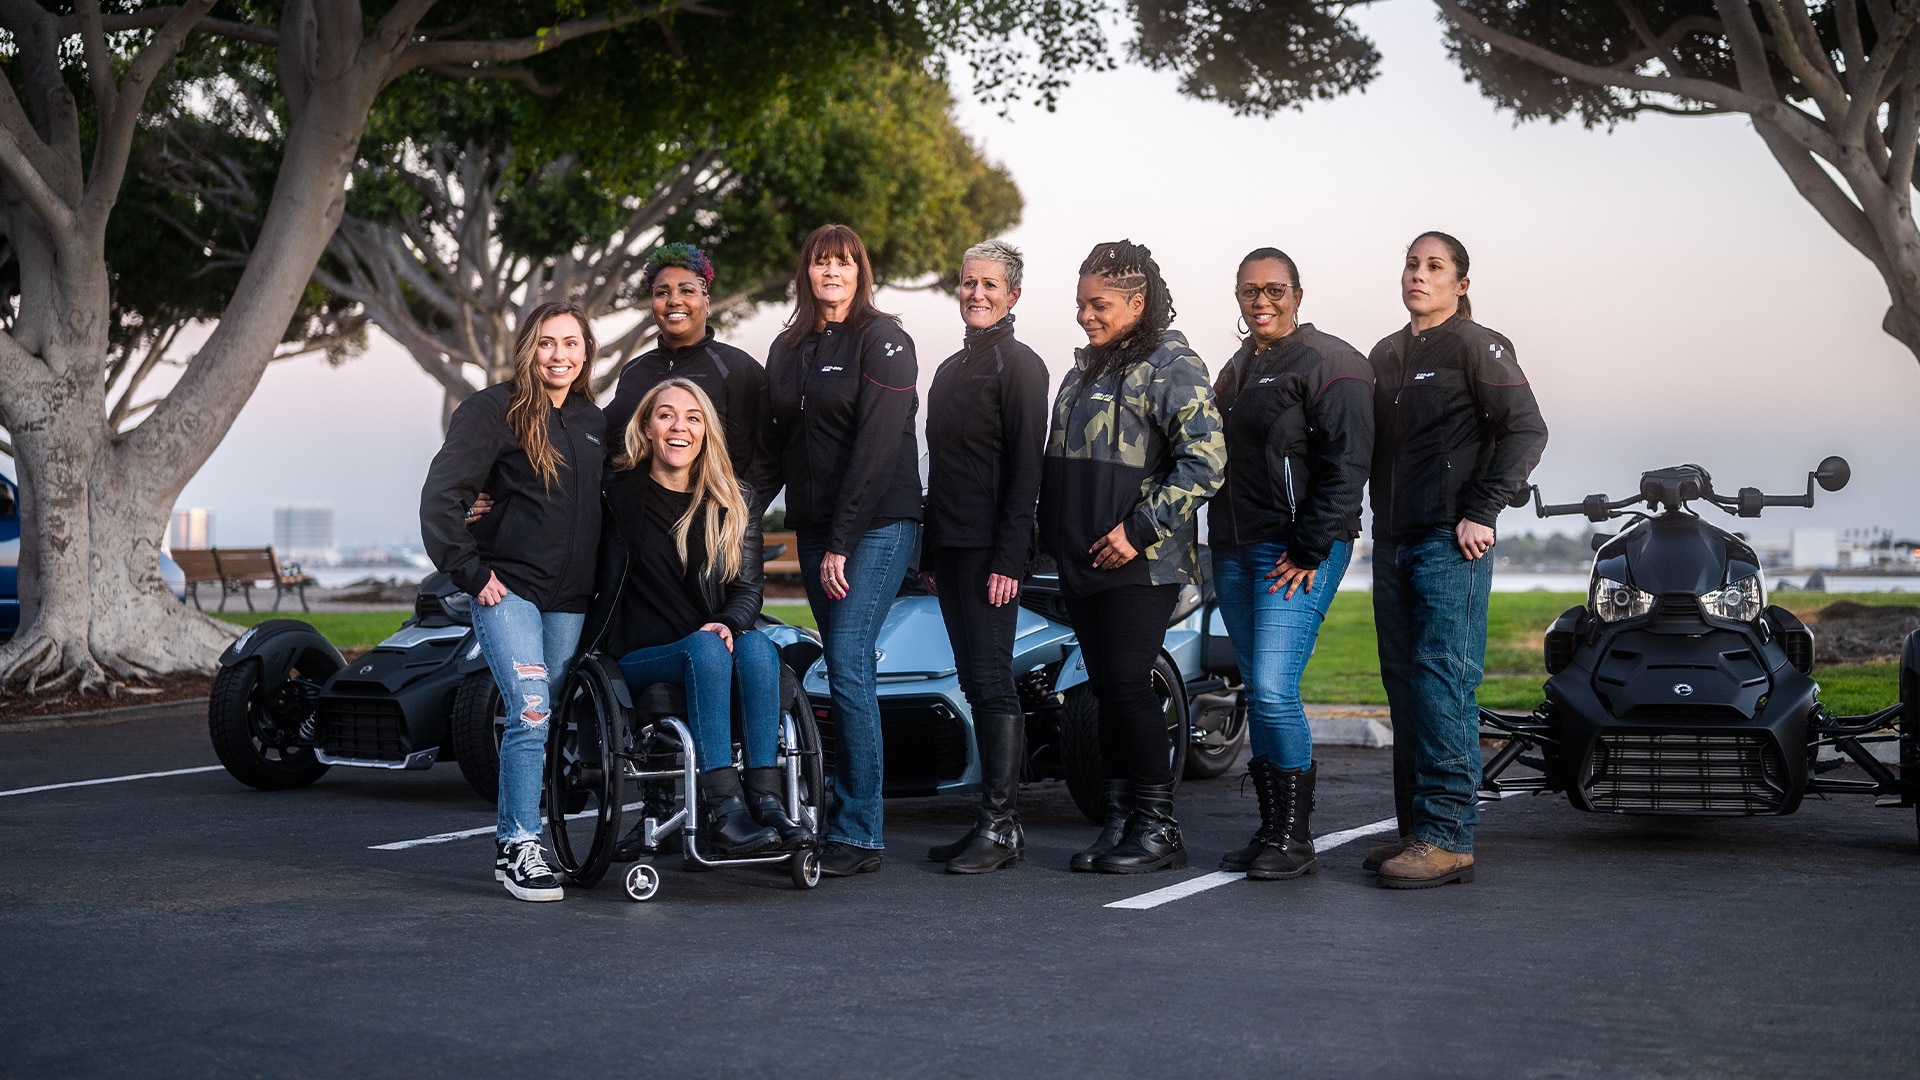 The women's riding community of Can-Am On-Road